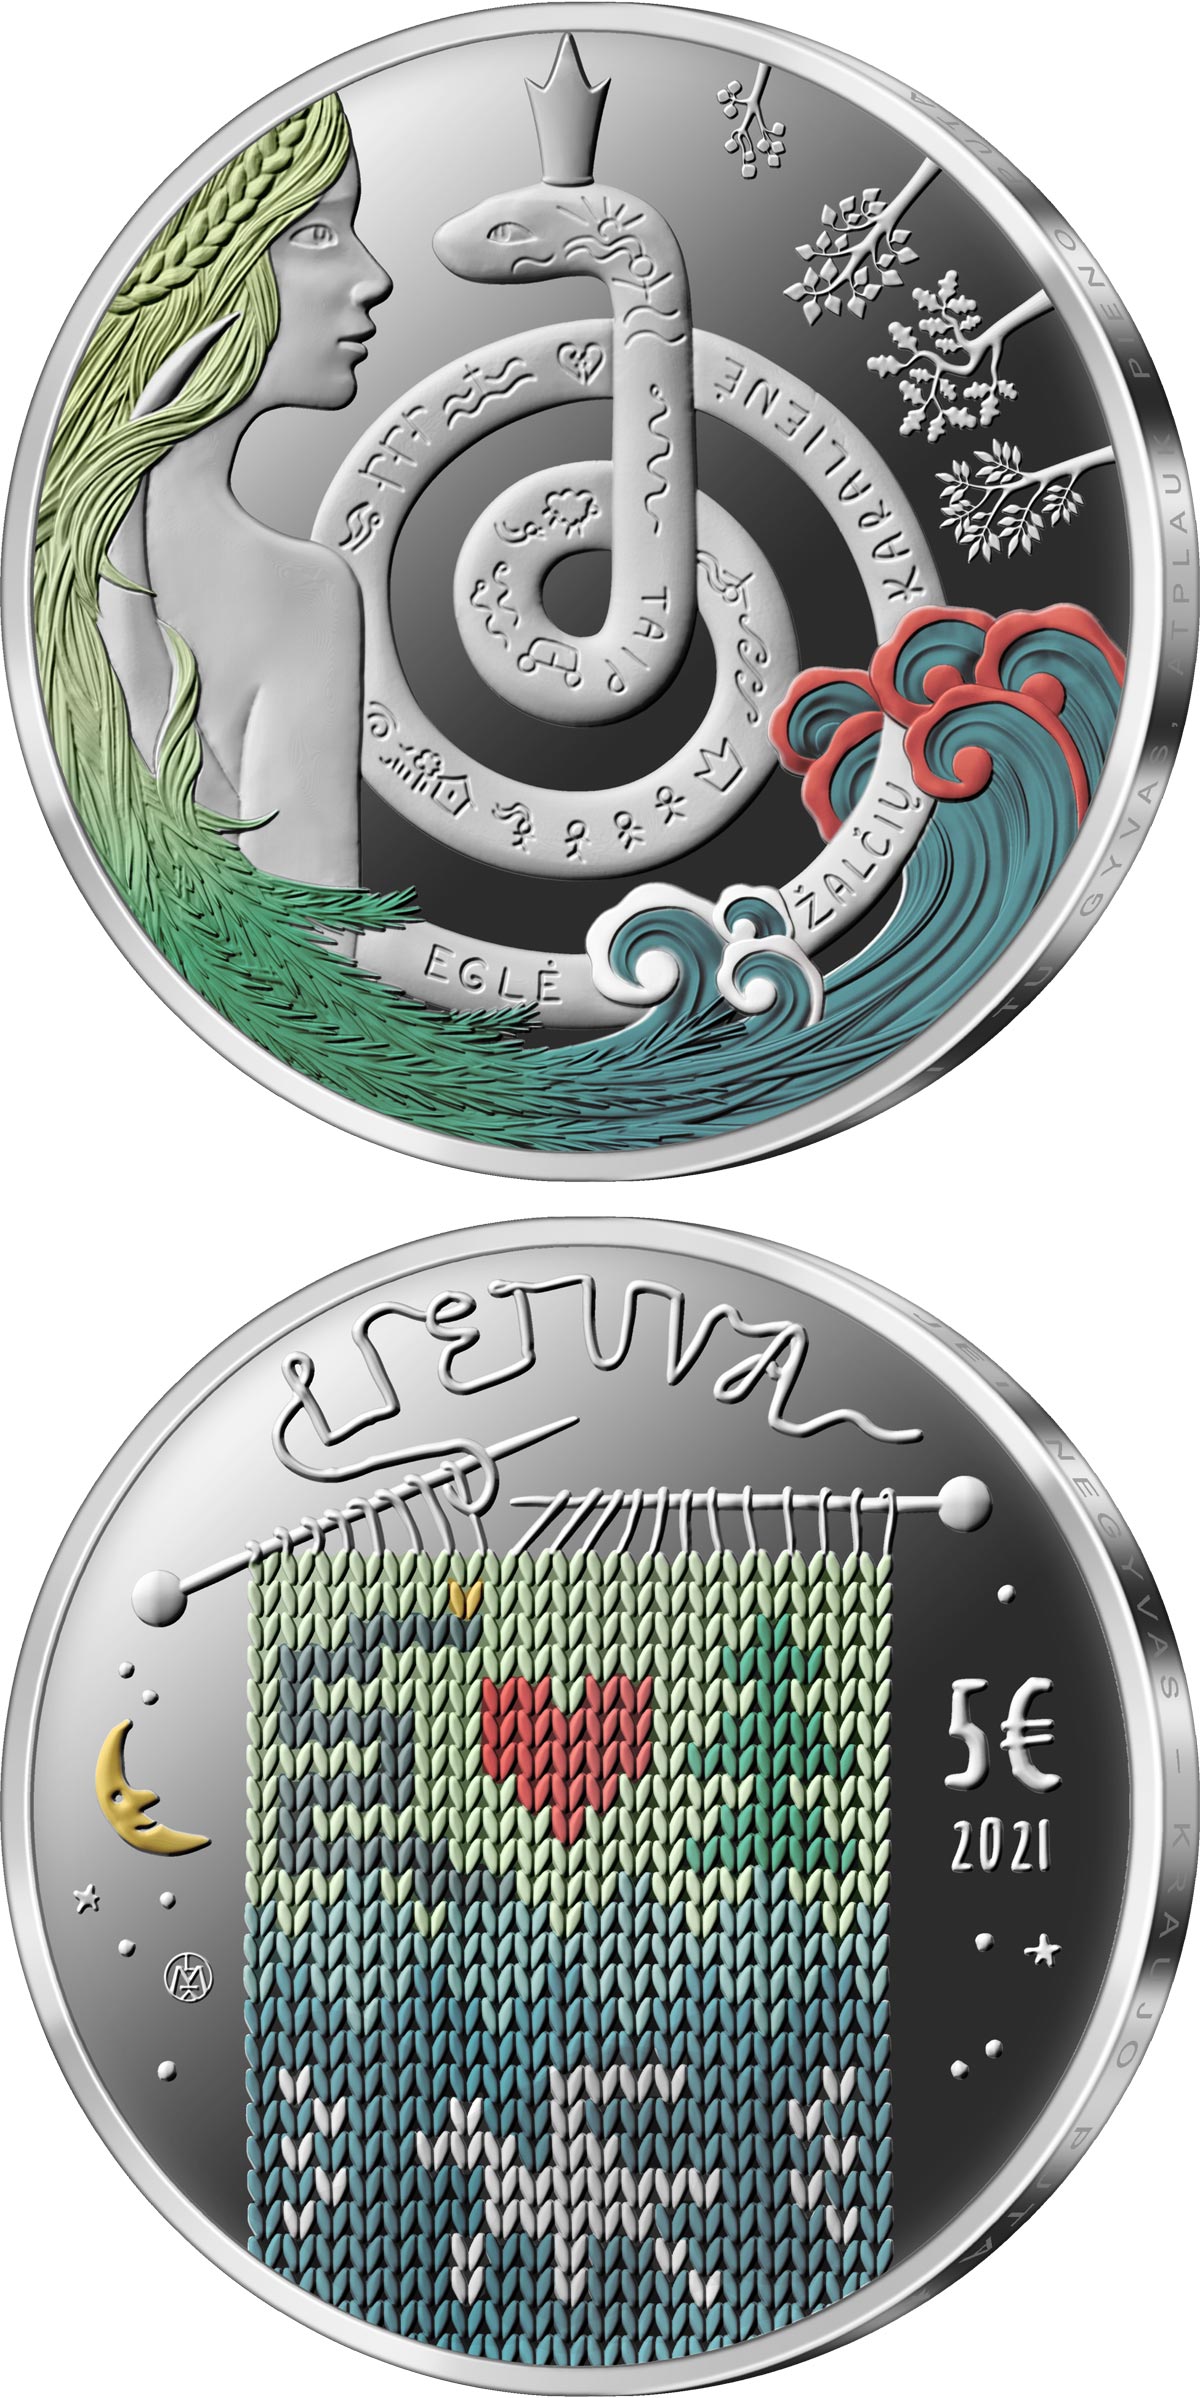 Image of 5 euro coin - Eglė - Queen of Serpents | Lithuania 2021.  The Silver coin is of Proof quality.